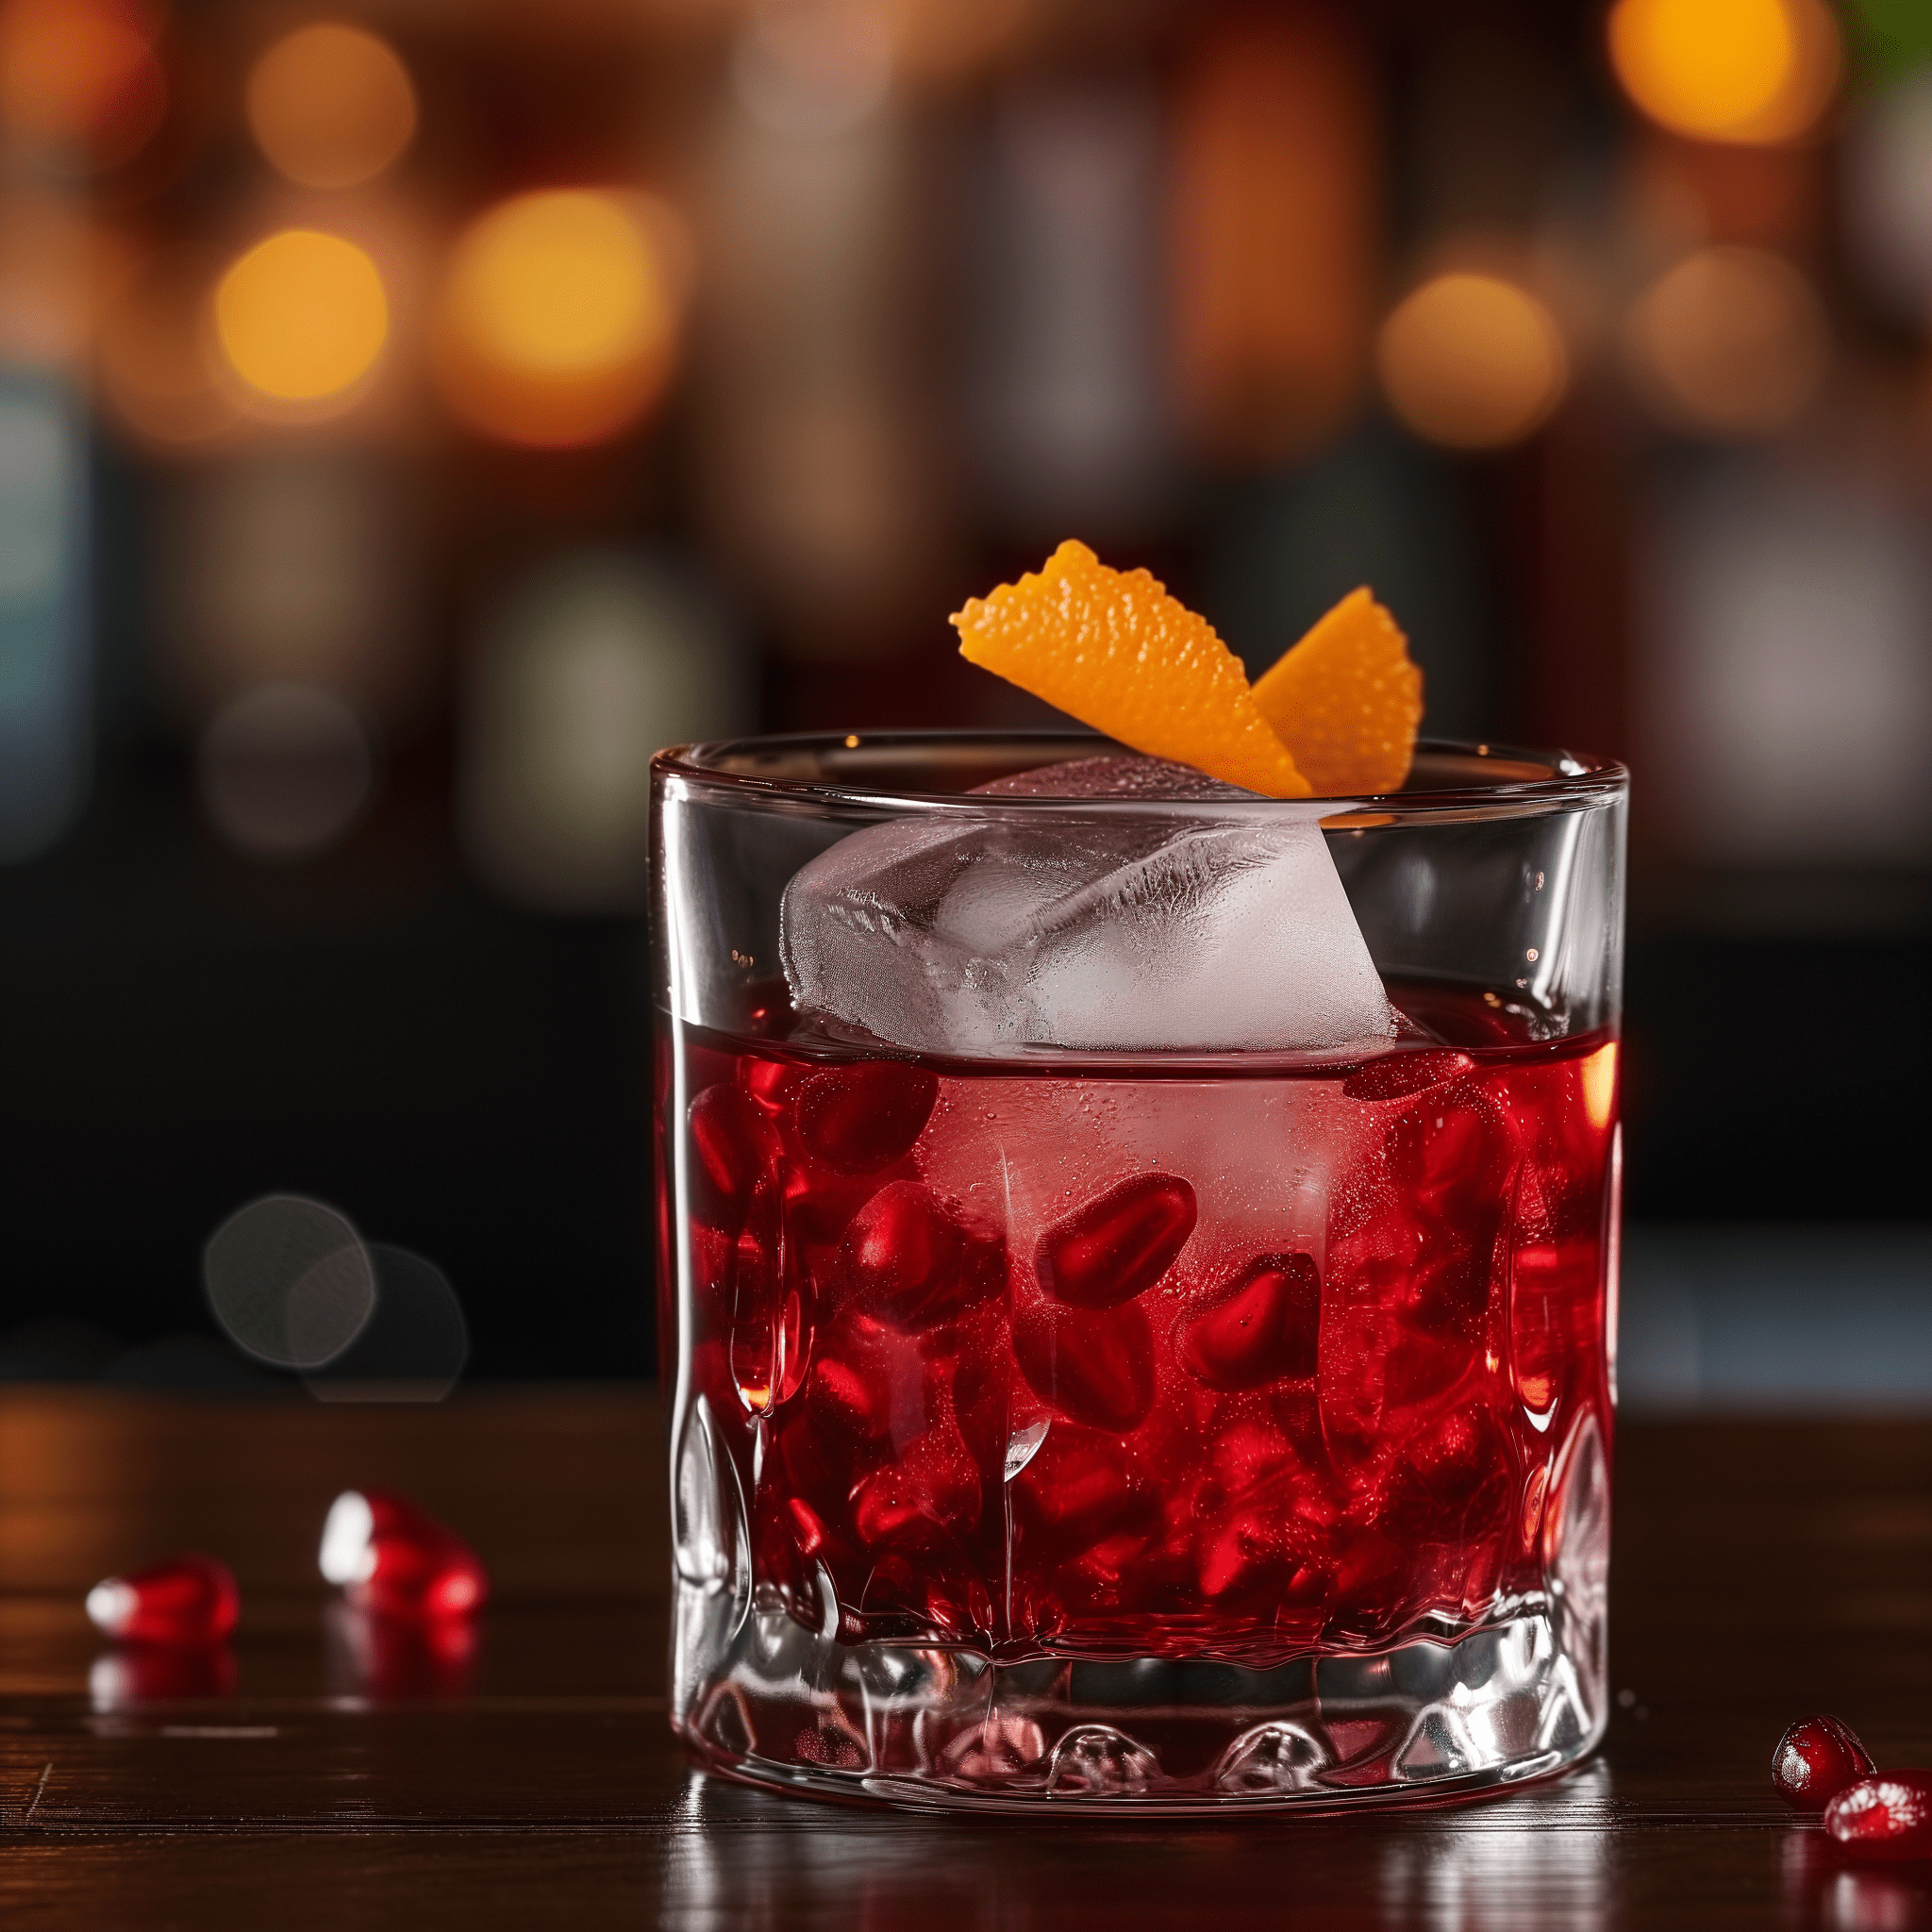 Pomegranate Negroni Cocktail Recipe - The Pomegranate Negroni offers a harmonious blend of sweet, tart, and bitter flavors. The pomegranate juice introduces a refreshing tartness, while the gin provides a crisp botanical backdrop. The red bitter liqueur imparts a deep bitterness that is balanced by the slightly sweet and floral notes of the aromatized wine. Overall, it's a complex, full-bodied cocktail with a lingering finish.